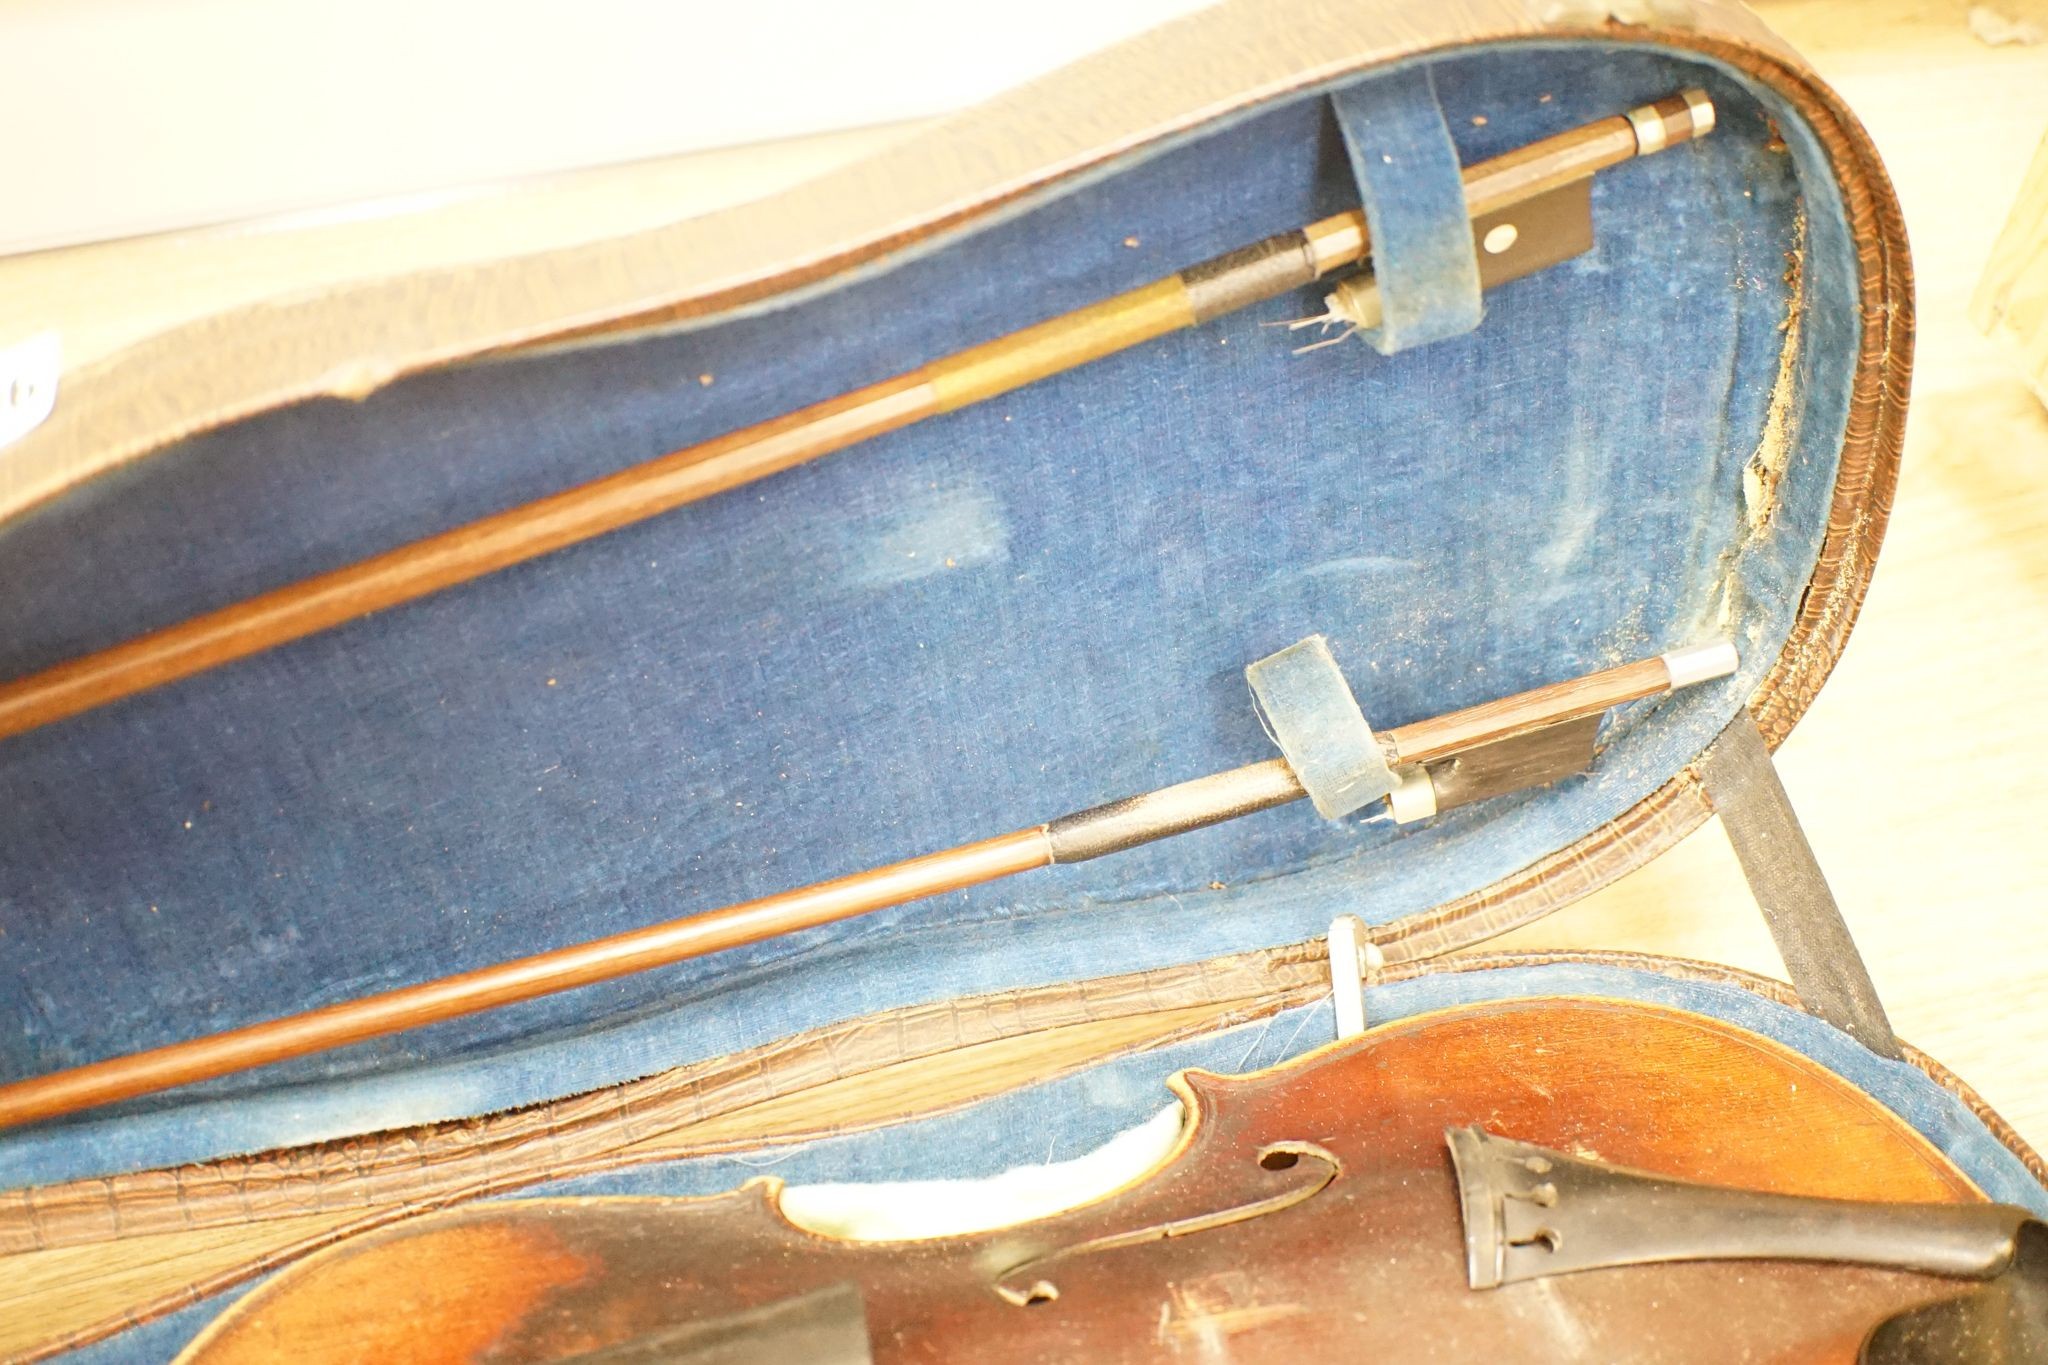 A late 19th century German violin and two bows, cased